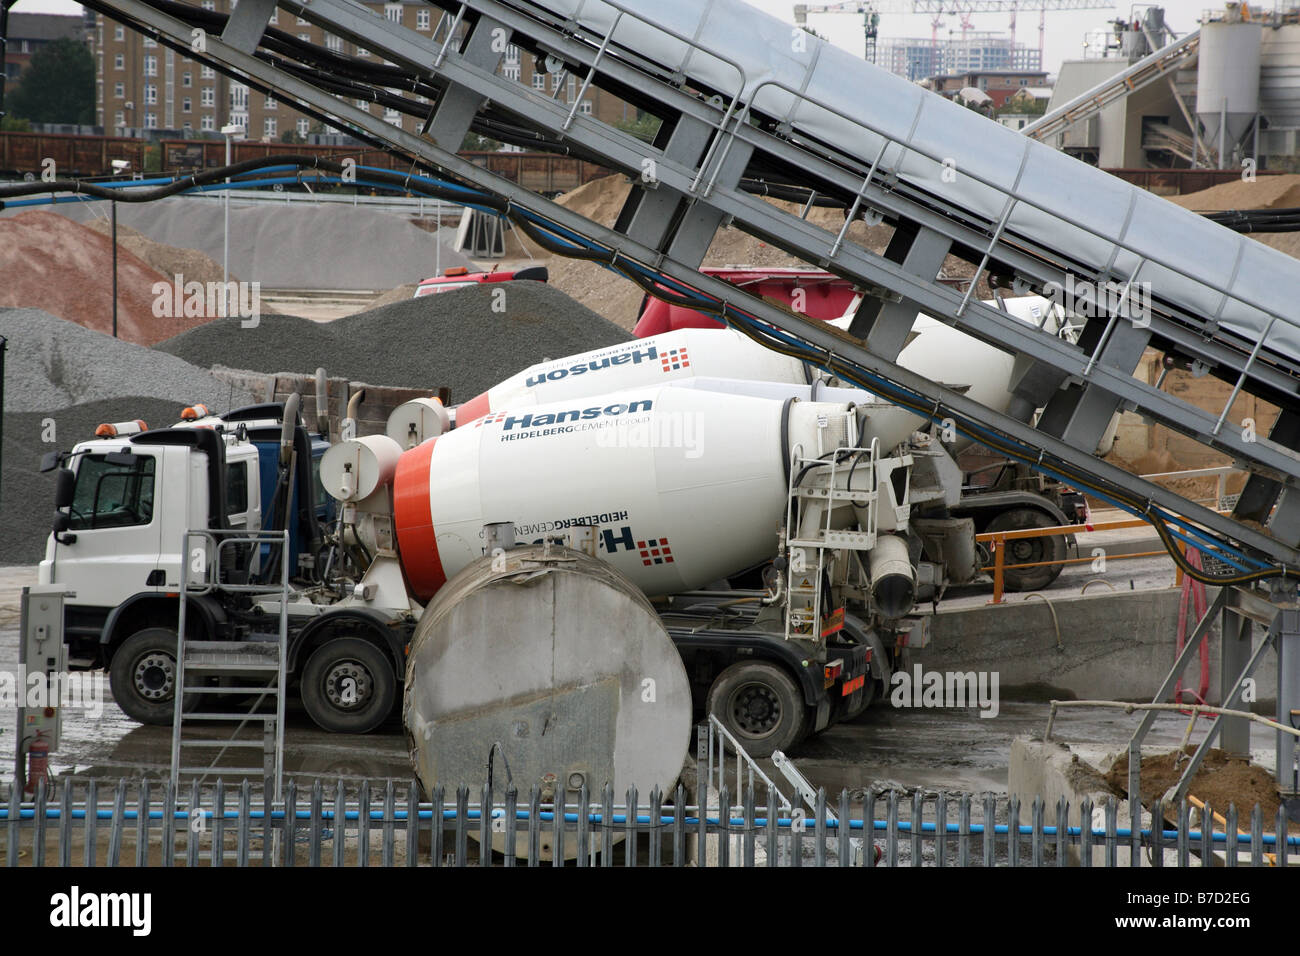 Hanson Cement High Resolution Stock Photography and Images - Alamy